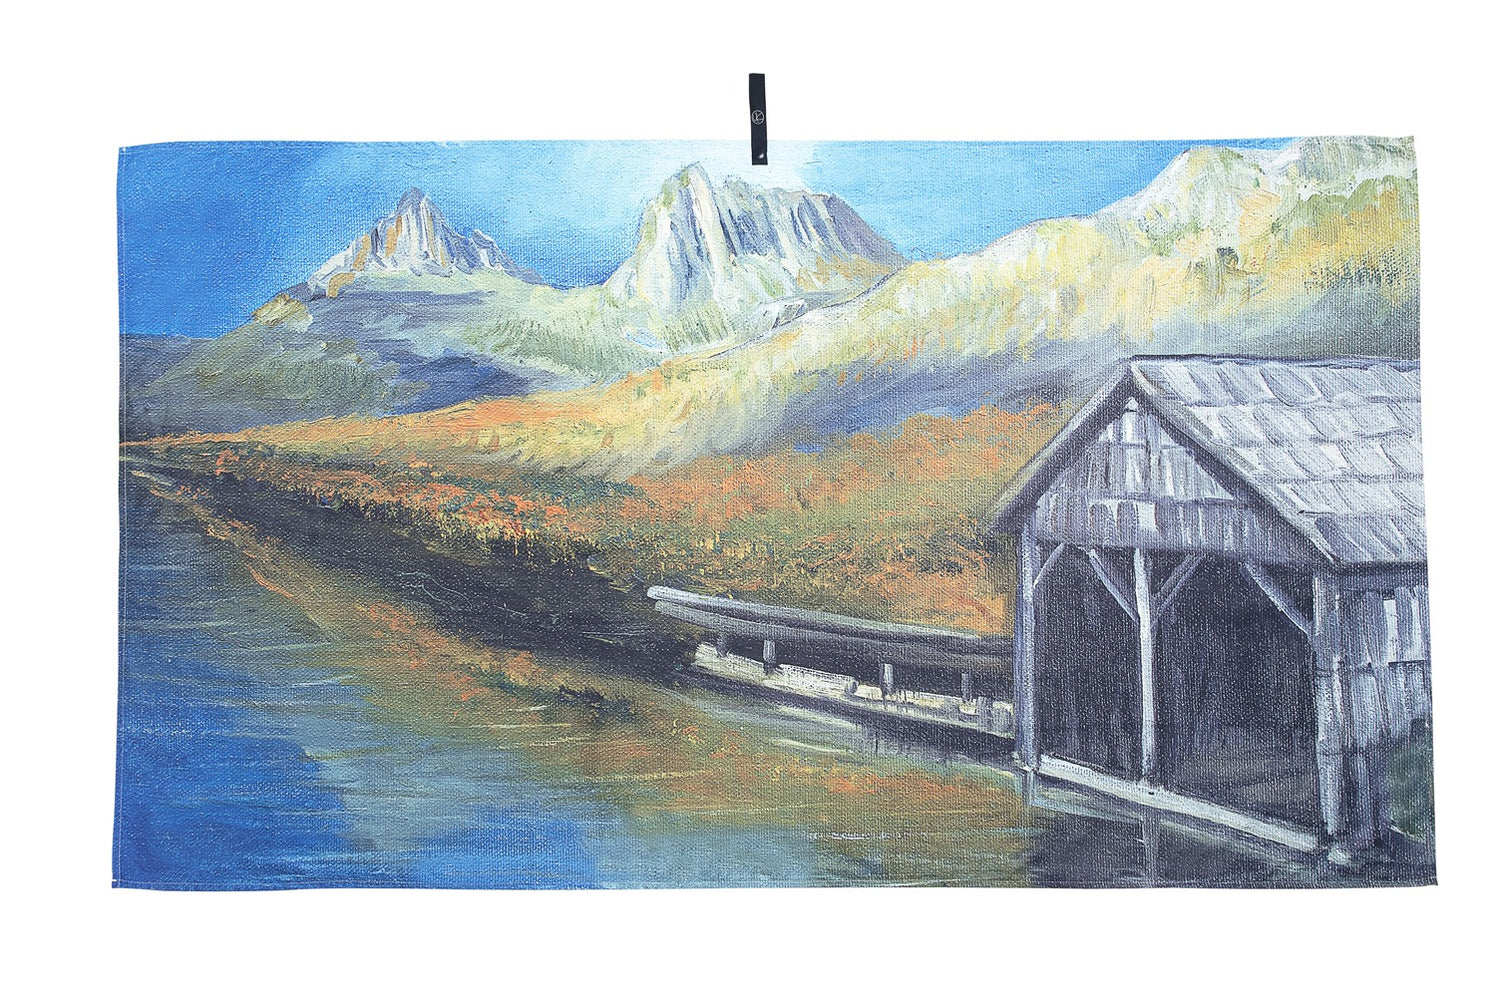 Cradle Mountain Microfibre Artistic Towel. The towel shows the famous Tasmanian’s Cradle Mountain, located at St. Clair National Park. The painting shows both the beautiful Cradle Mountain at the back in a vivid greenery scenery and the boat house, as the calm Dove Lake reflects them. The artwork was inspired by the mesmerizing Tasmania beauty and intended for those who are nature lovers and adventure seekers! Large size, 170cm x 95cm, soft touch, highly absorbent and quick-drying, compact towel. 